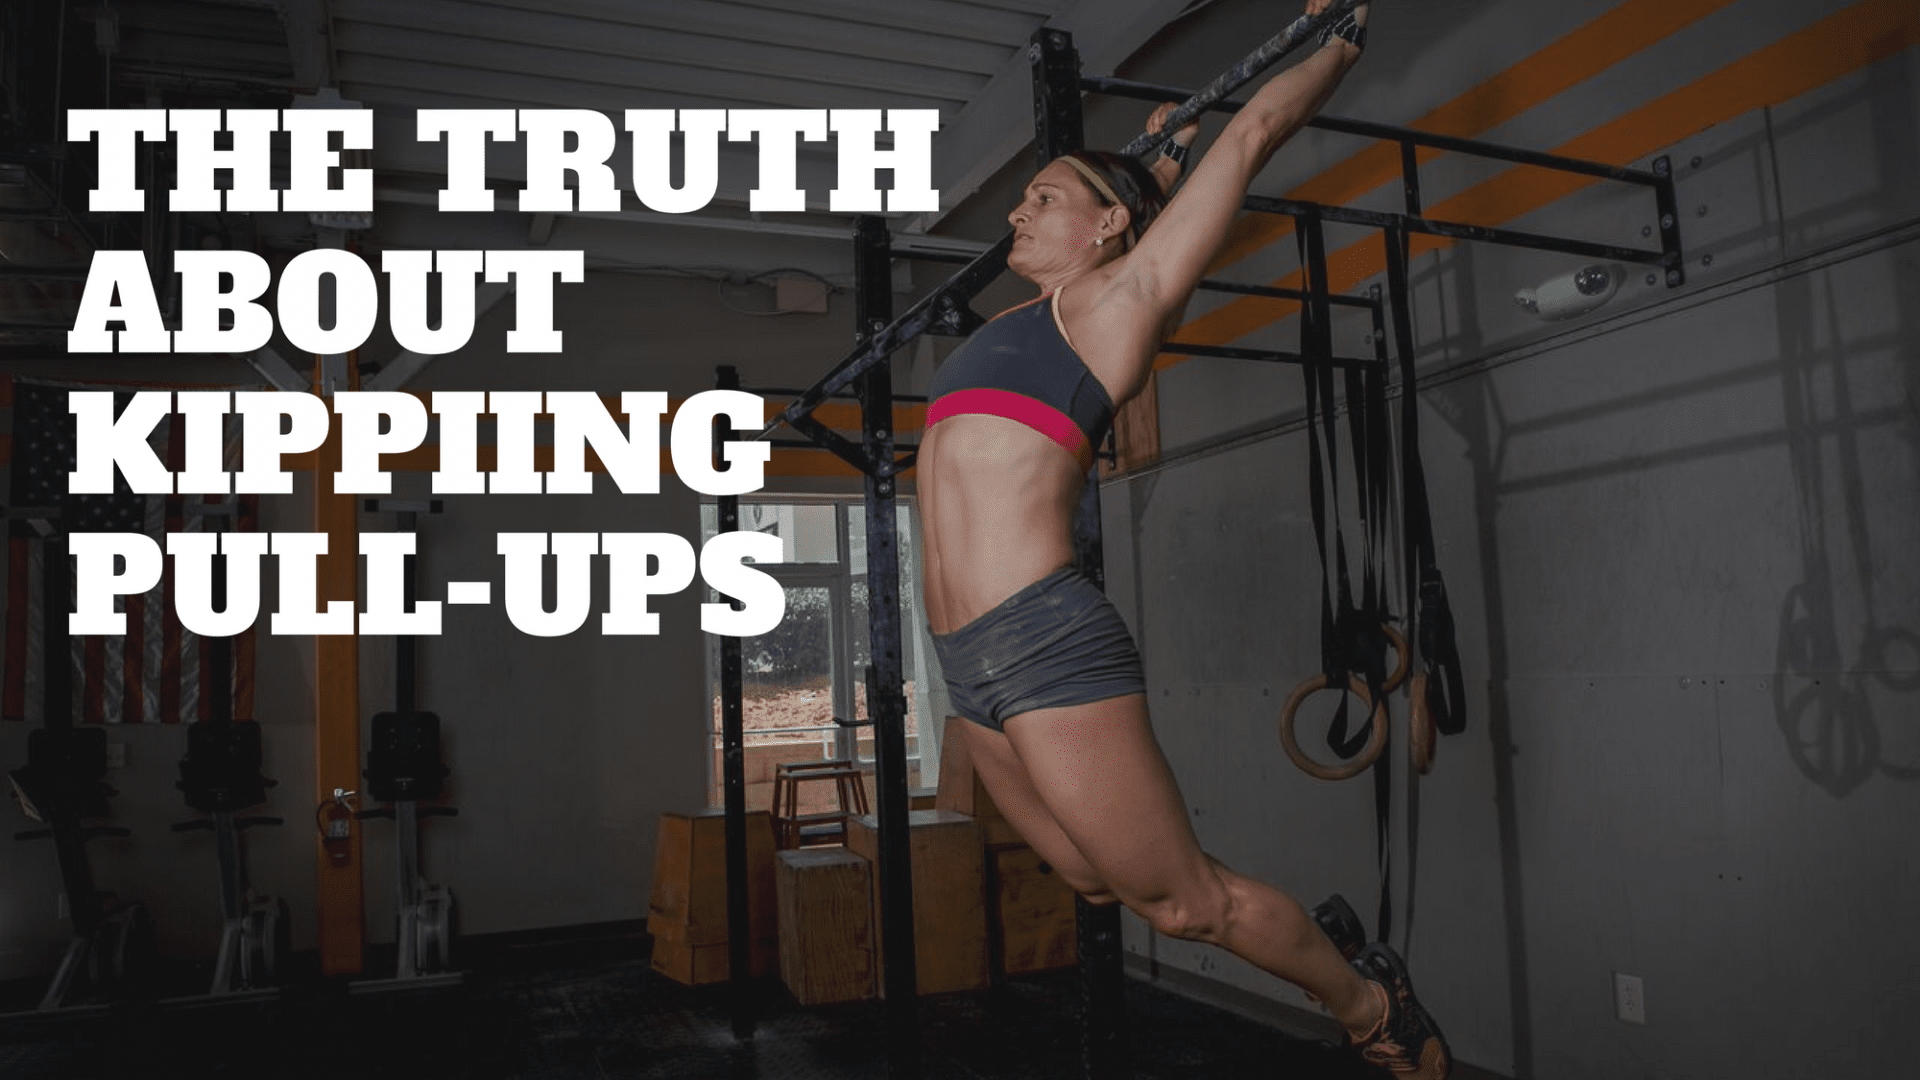 Featured image for “The Truth About Kipping Pull-ups”